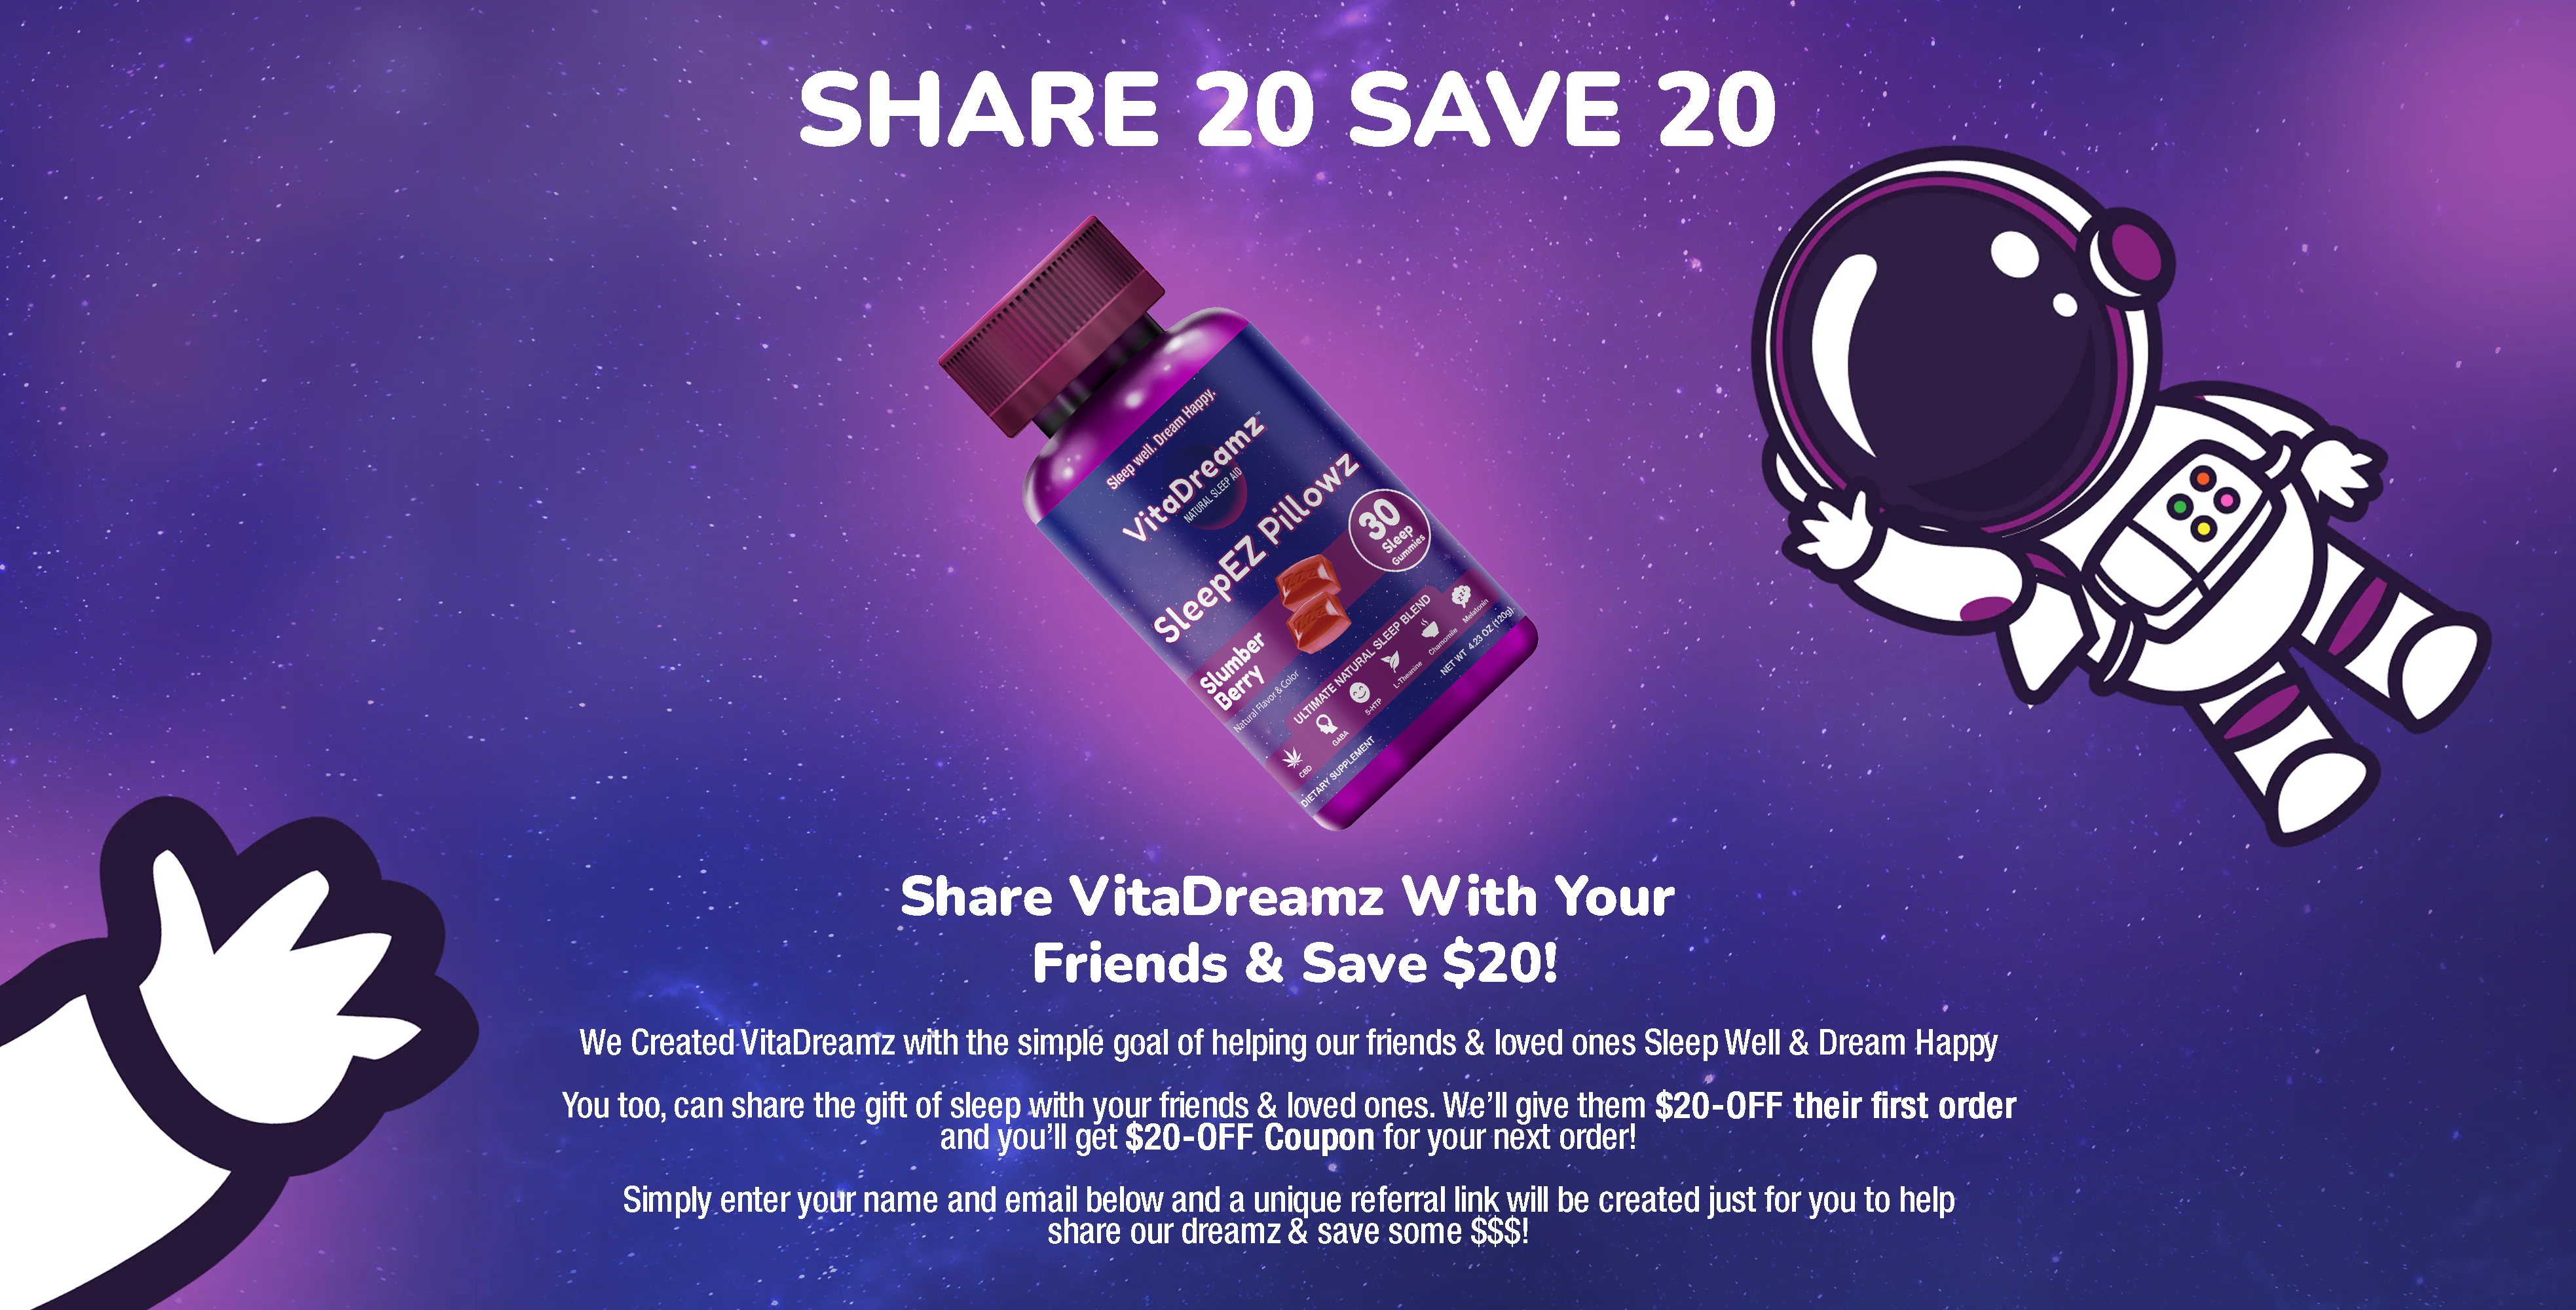 Share VitaDreamz with your friends & Save $20!